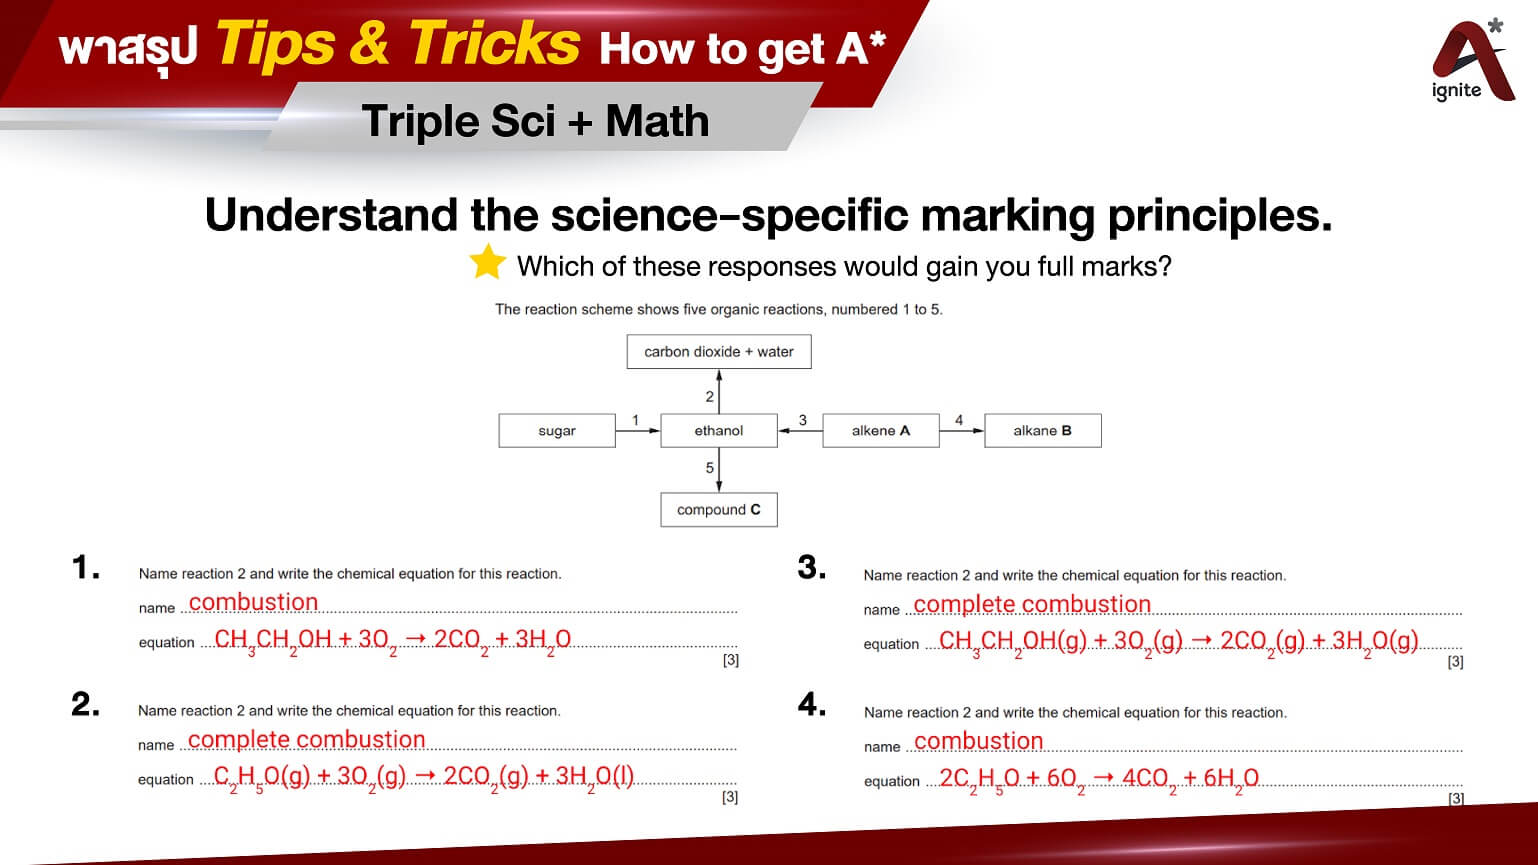 tip and trick on how to get a star on IGCSE triple science, chemistry, by ignite a star